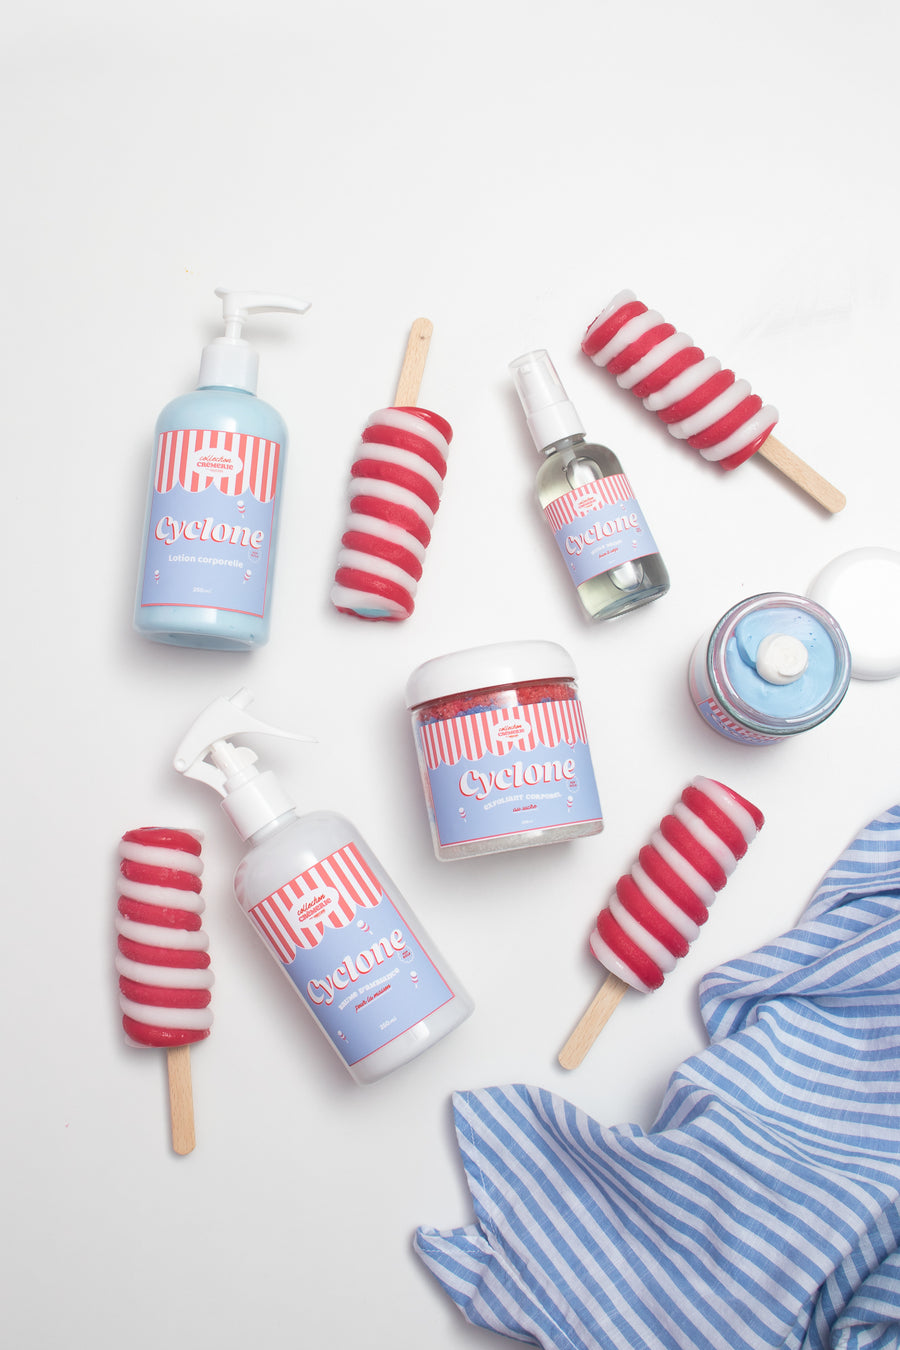 Lotion corporelle - Popsicle cyclone